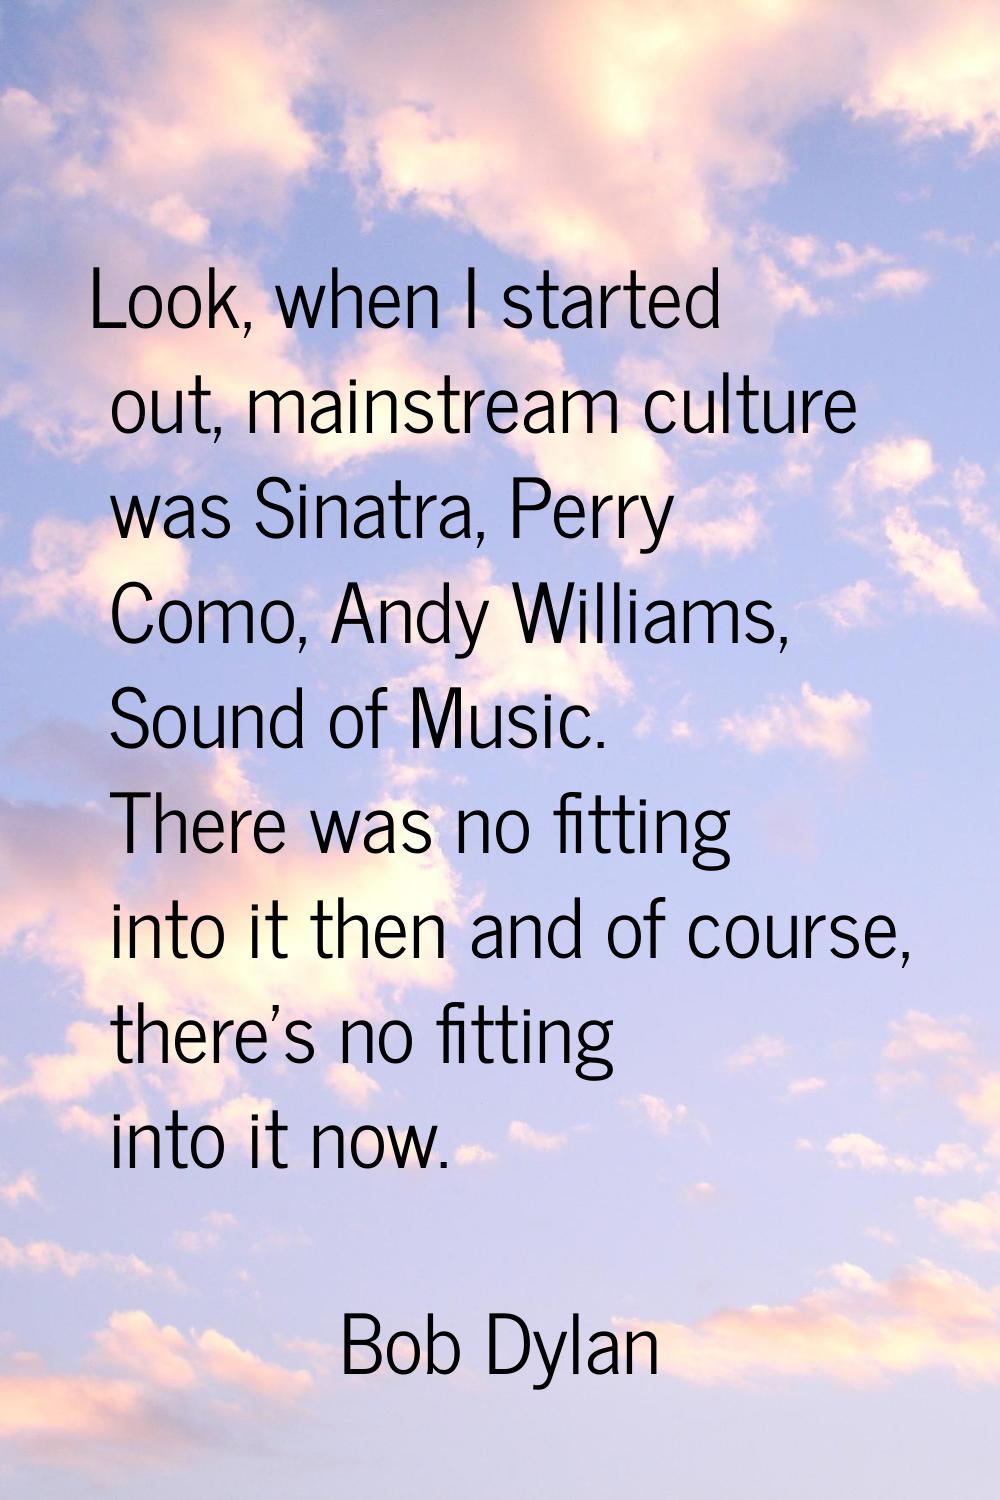 Look, when I started out, mainstream culture was Sinatra, Perry Como, Andy Williams, Sound of Music